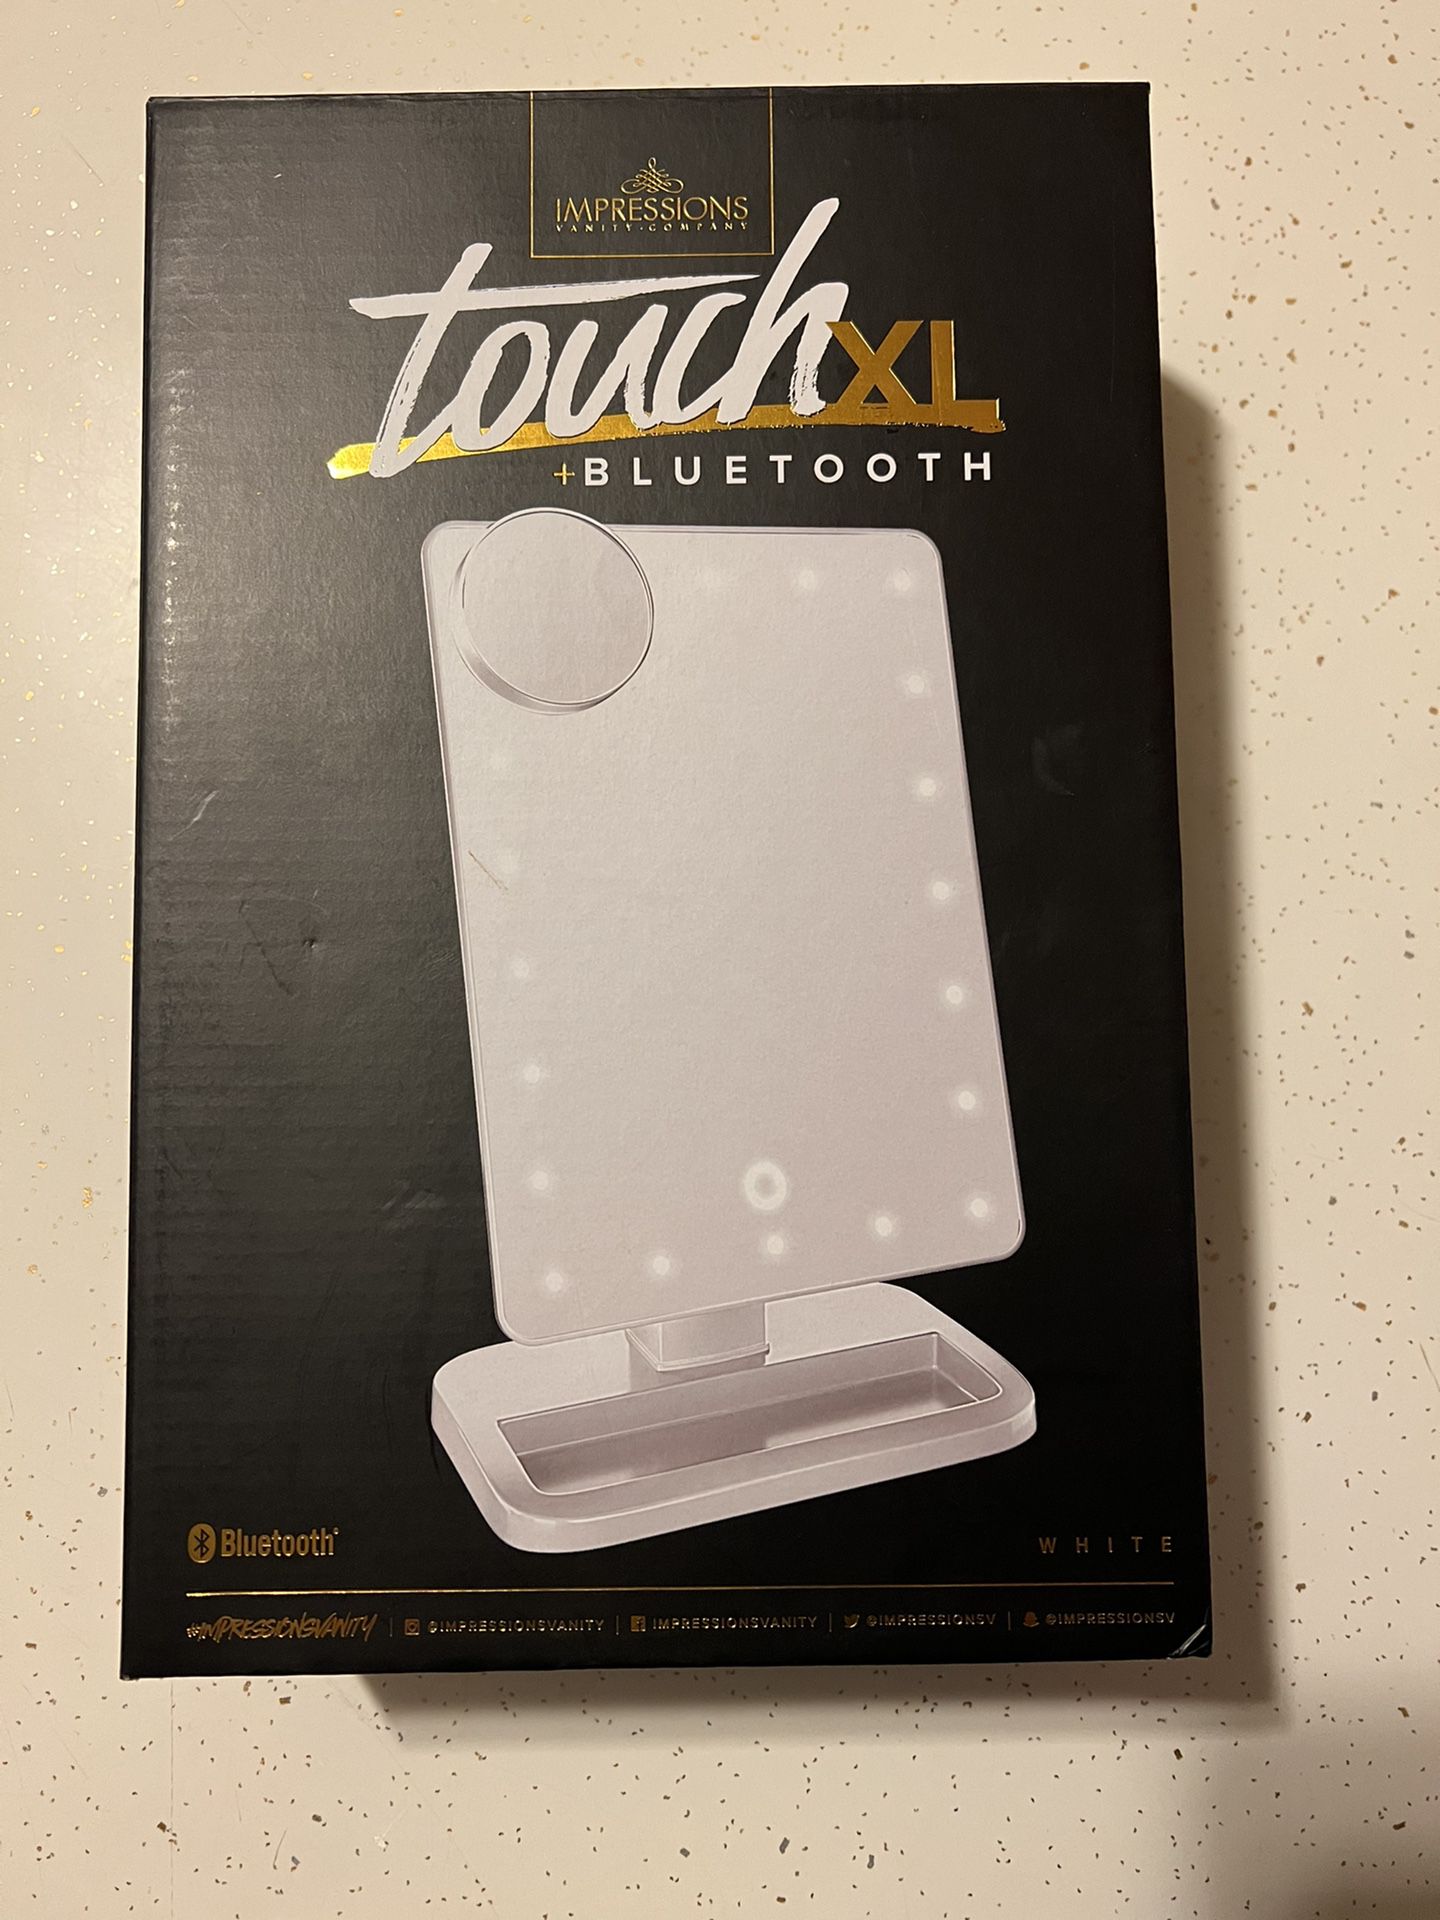 Impressions Vanity Touch XL bluetooth 